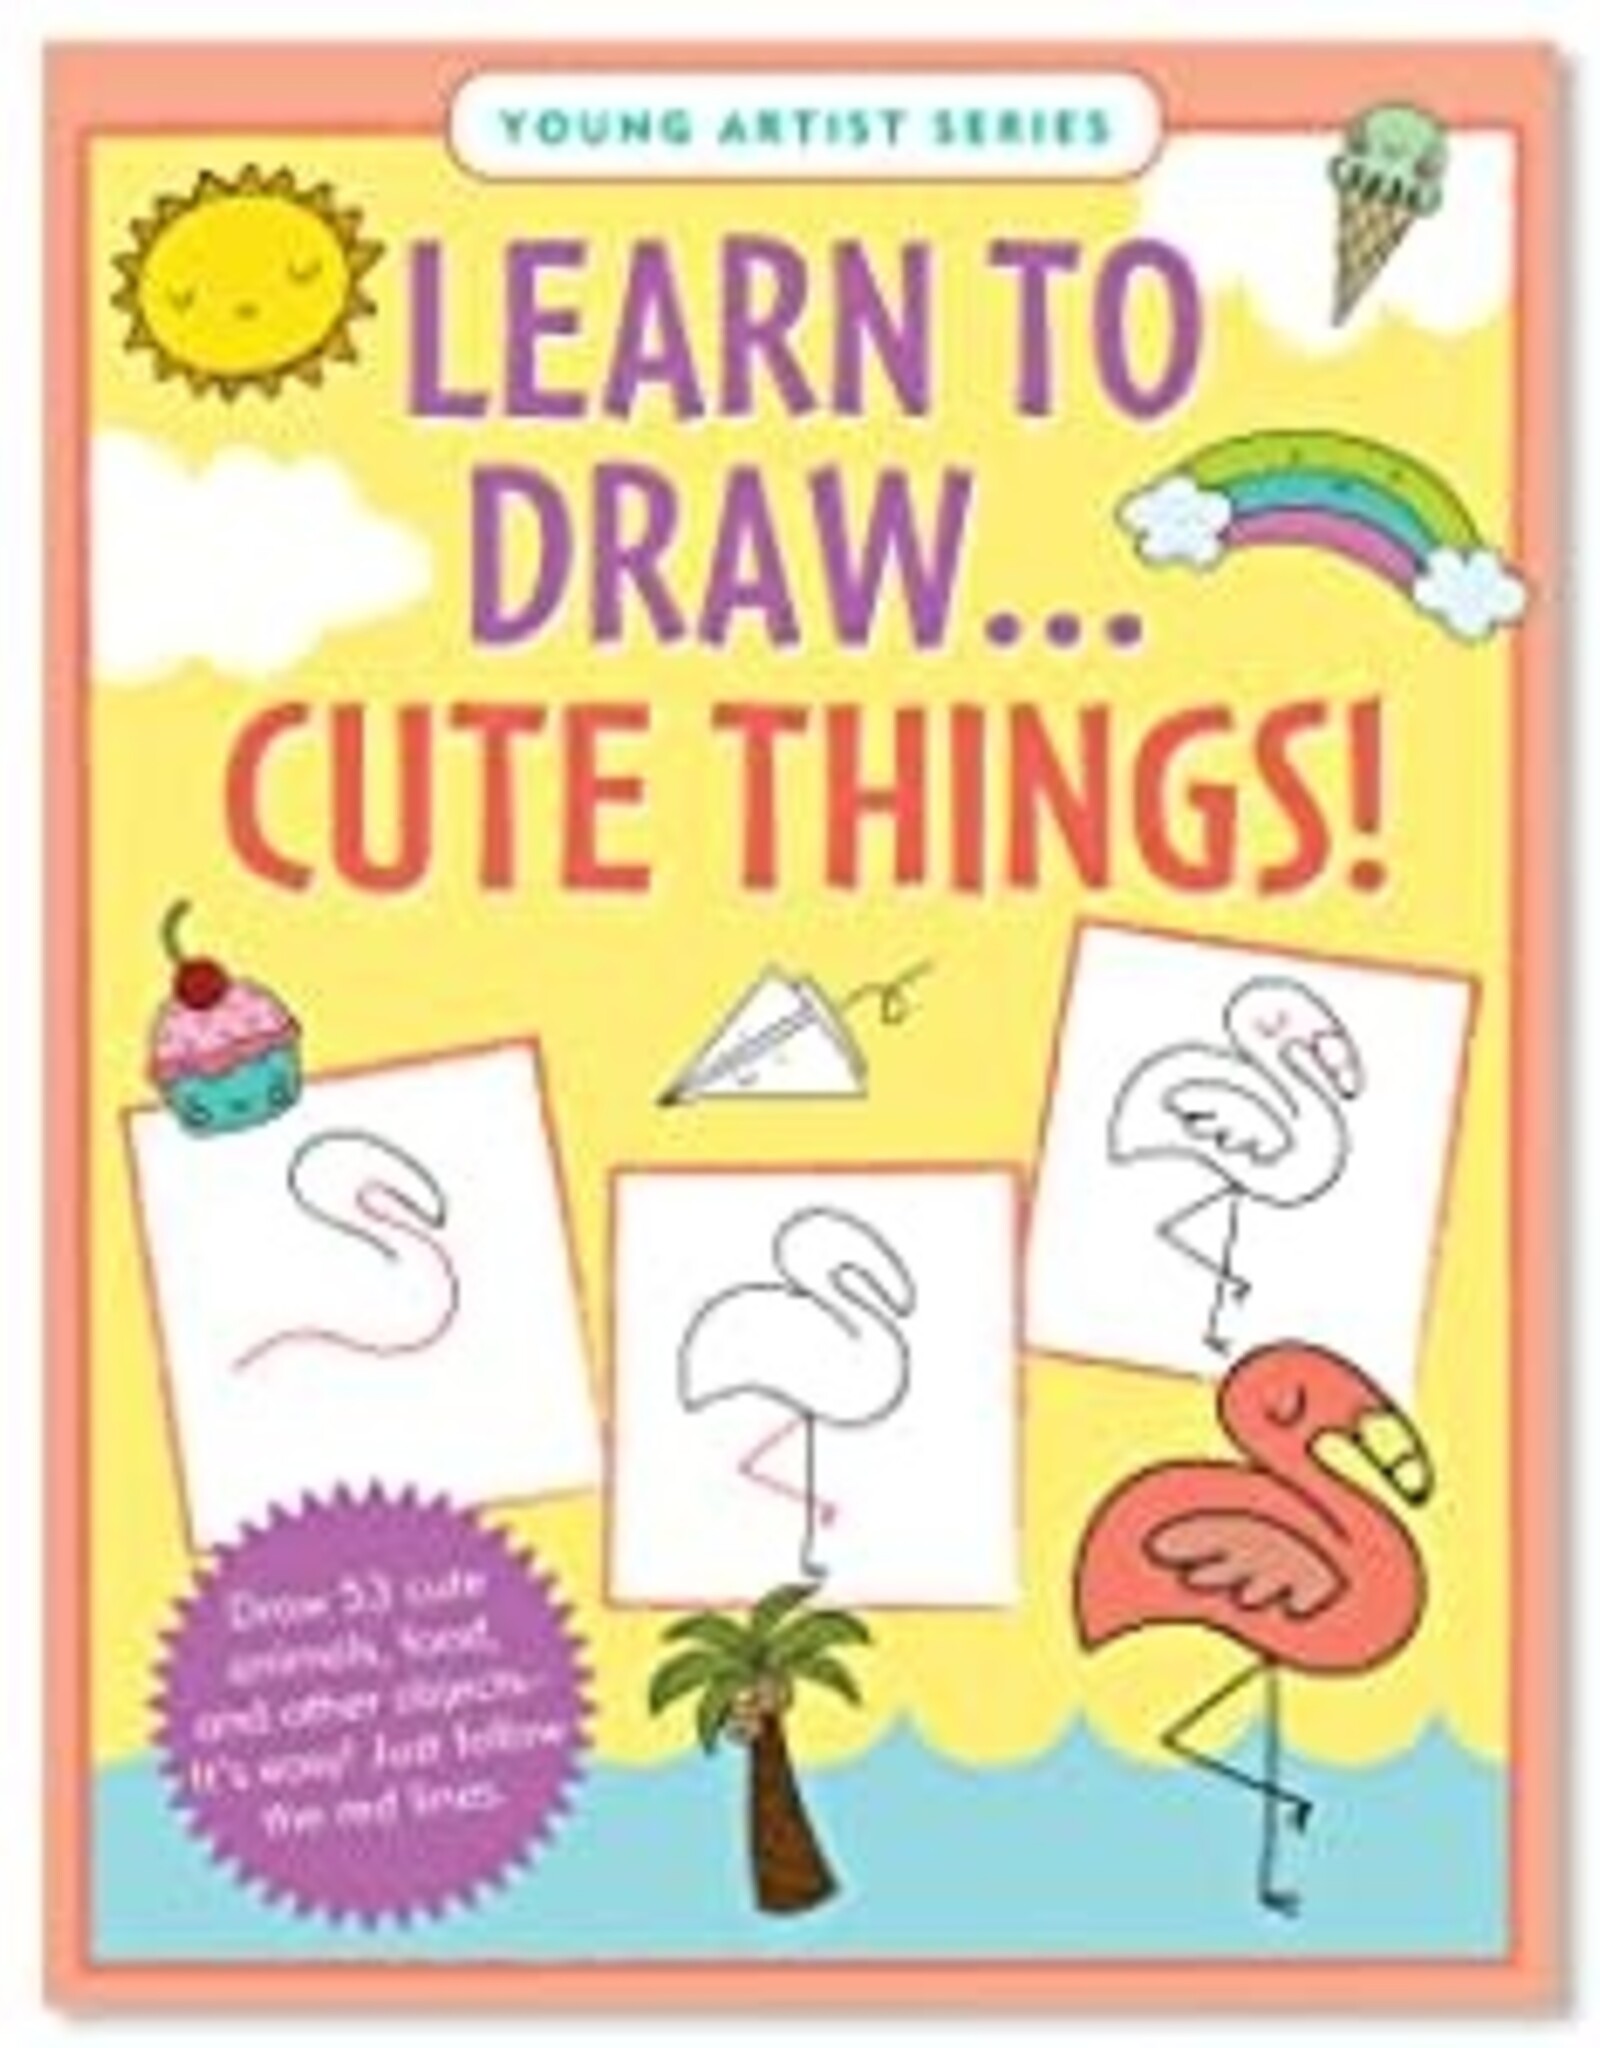 Peter Pauper Press LEARN TO DRAW . . . CUTE THINGS!